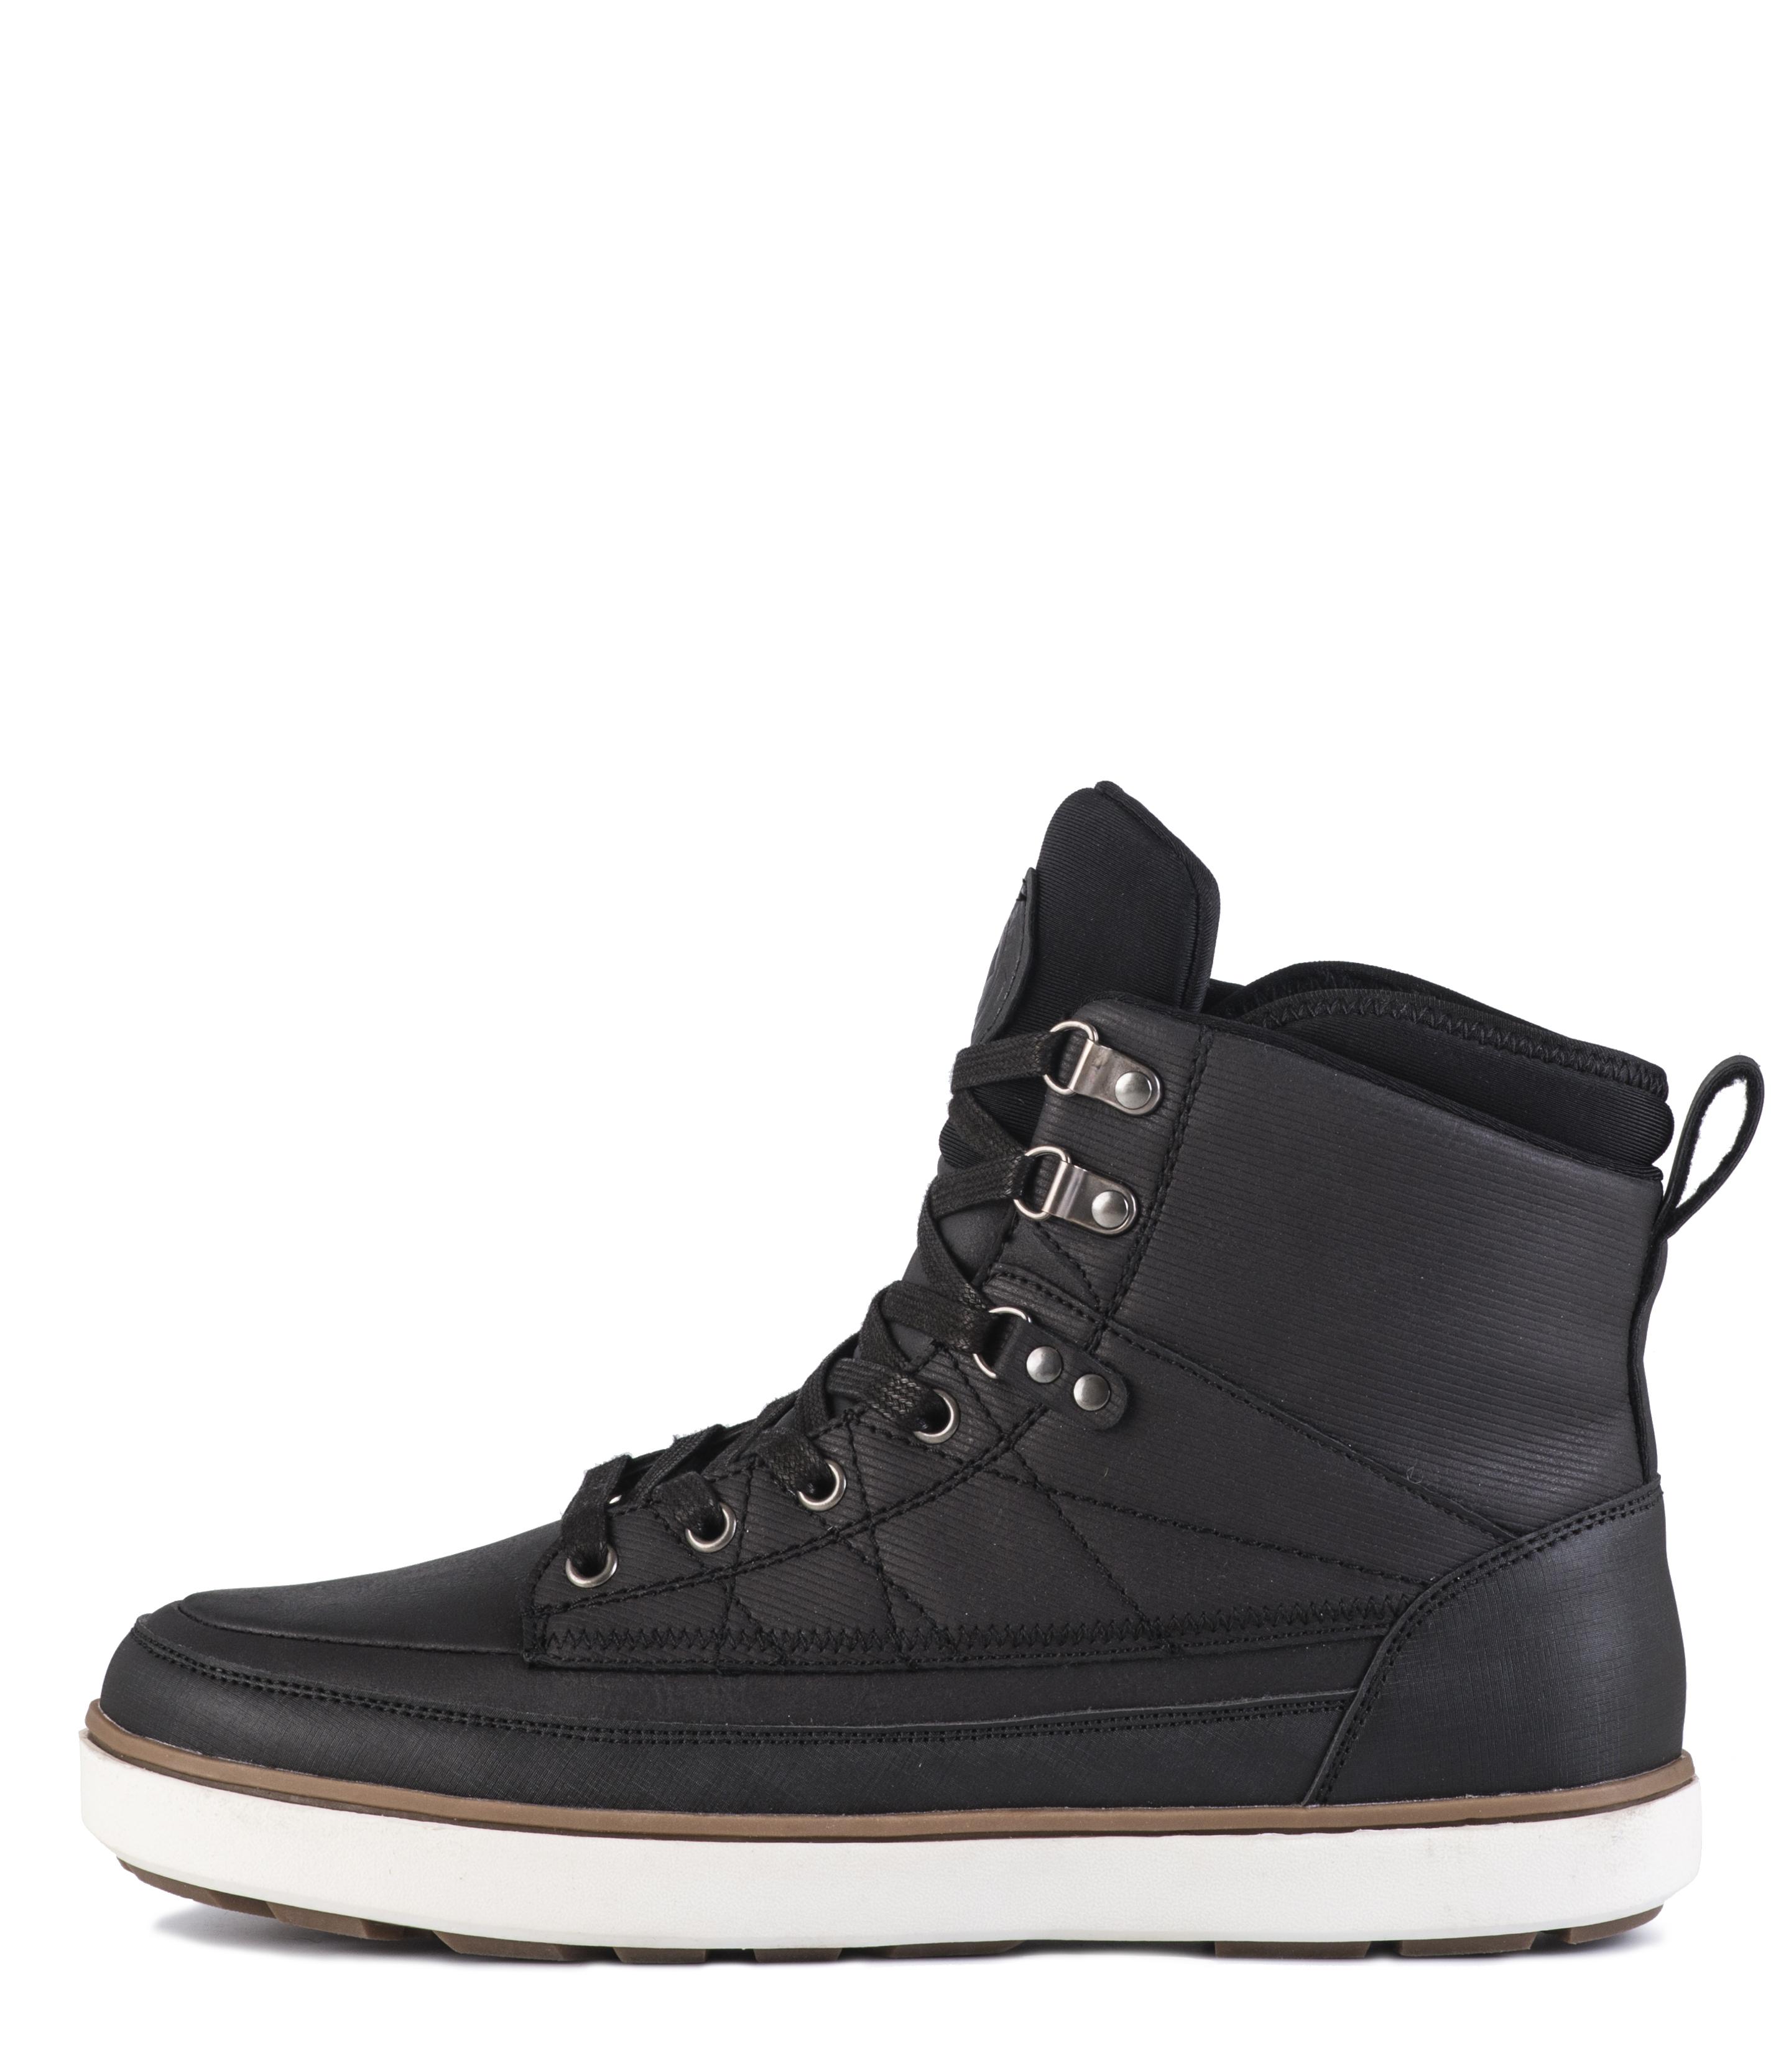 Available at THE SHOE COMPANY / DSW shoes for MENS - Winter Boots shoes